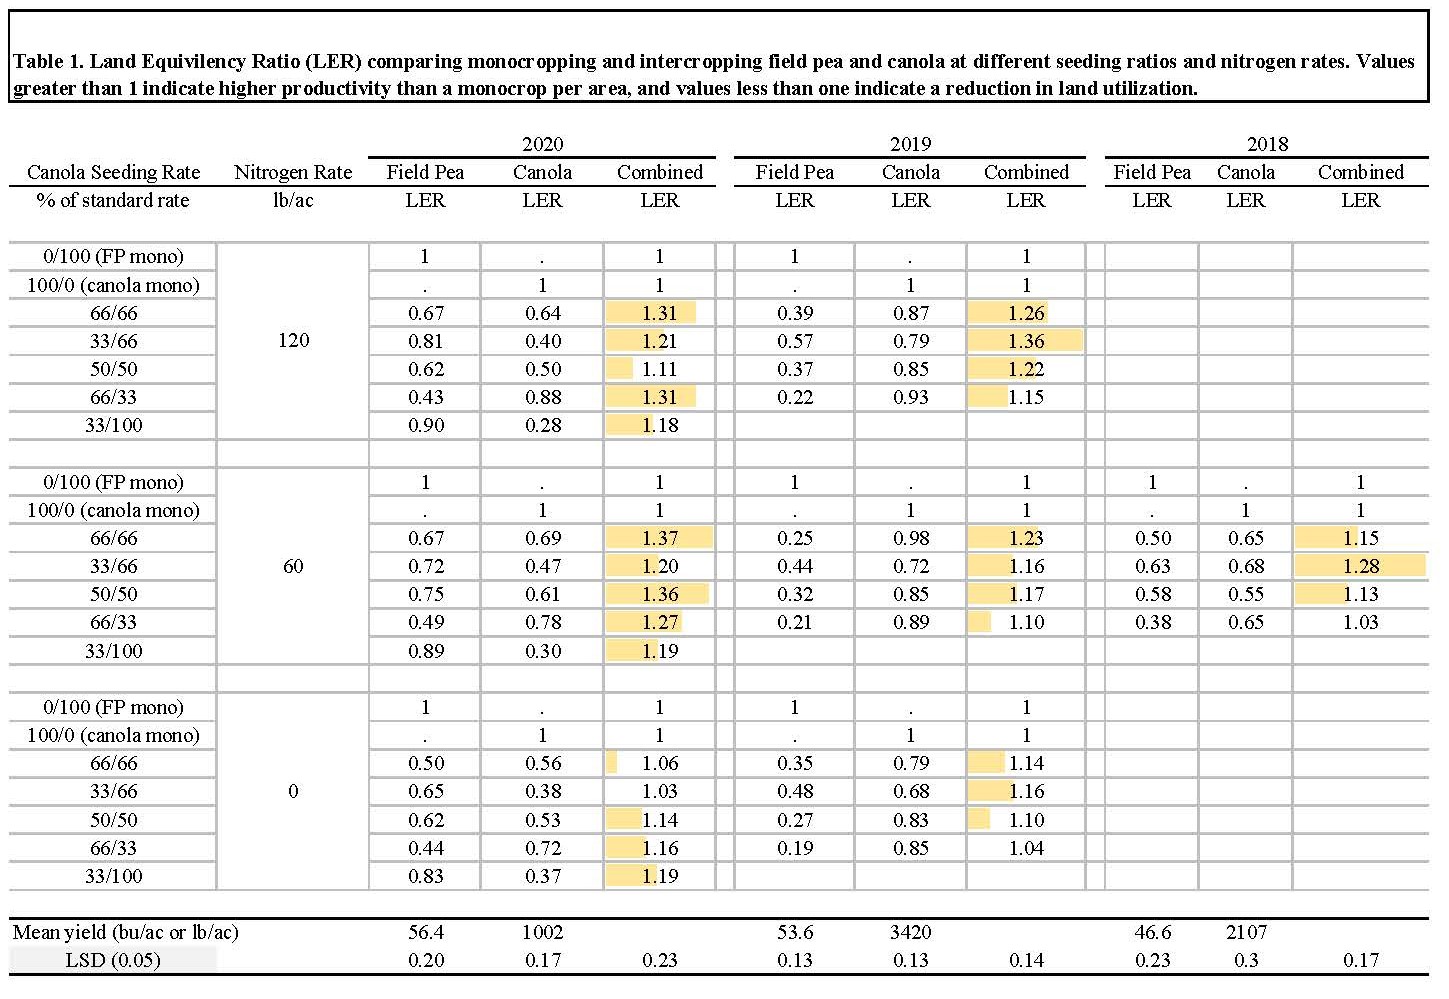 Table showing land equivalency ratio comparing monocropping and intercropping.